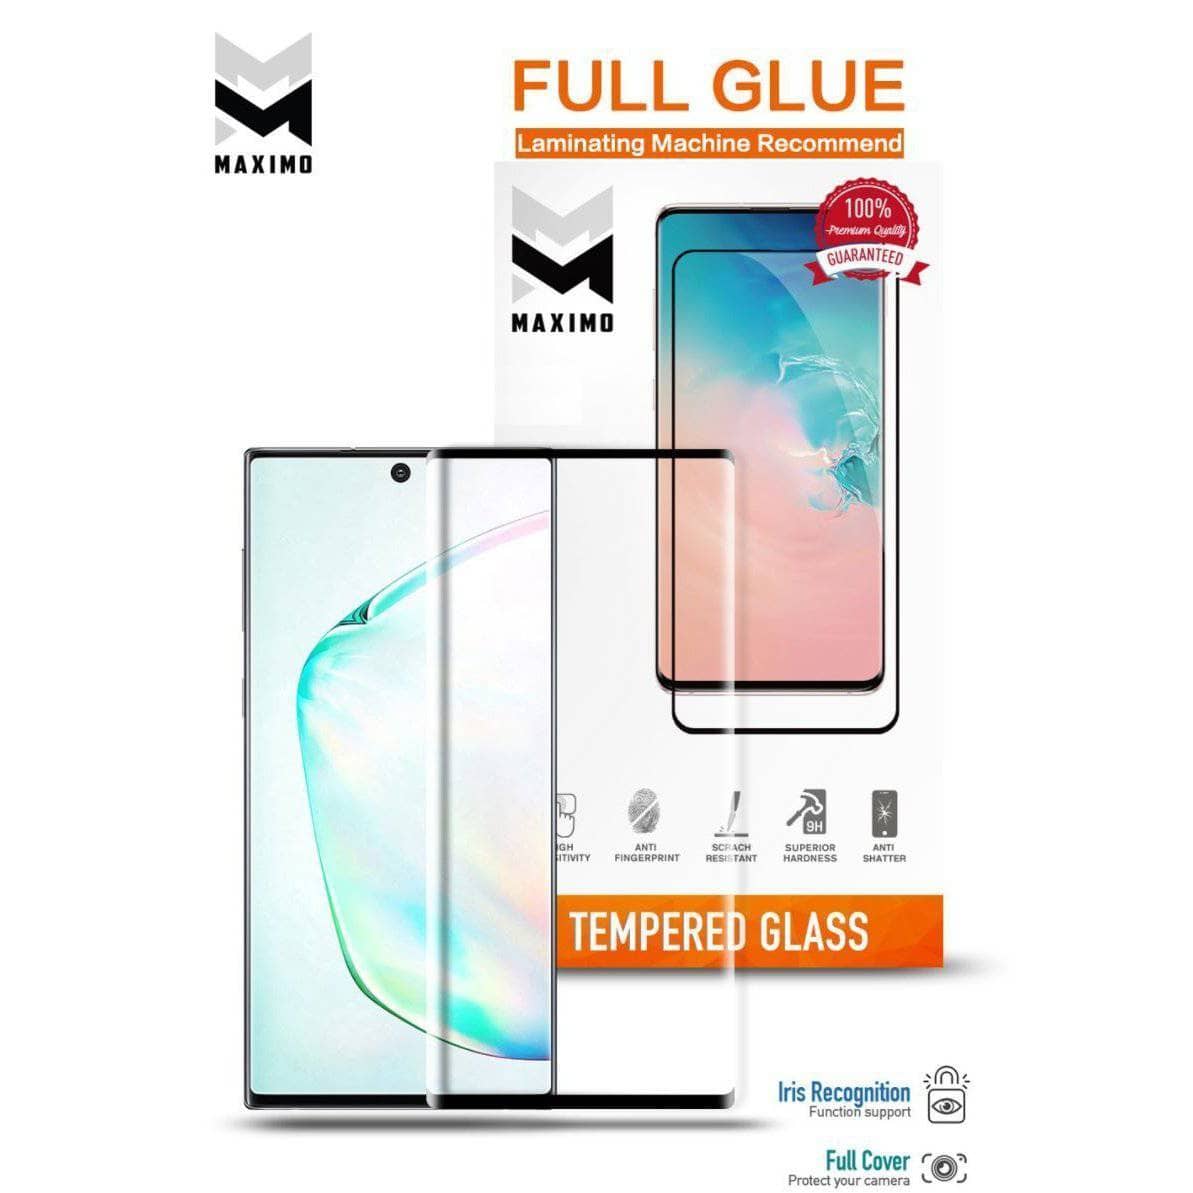 Huawei P30 Pro MAXIMO Full Glue Tempered Glass Screen Protector Shockproof-Screen Protector-MAXIMO-www.PhoneGuy.com.au